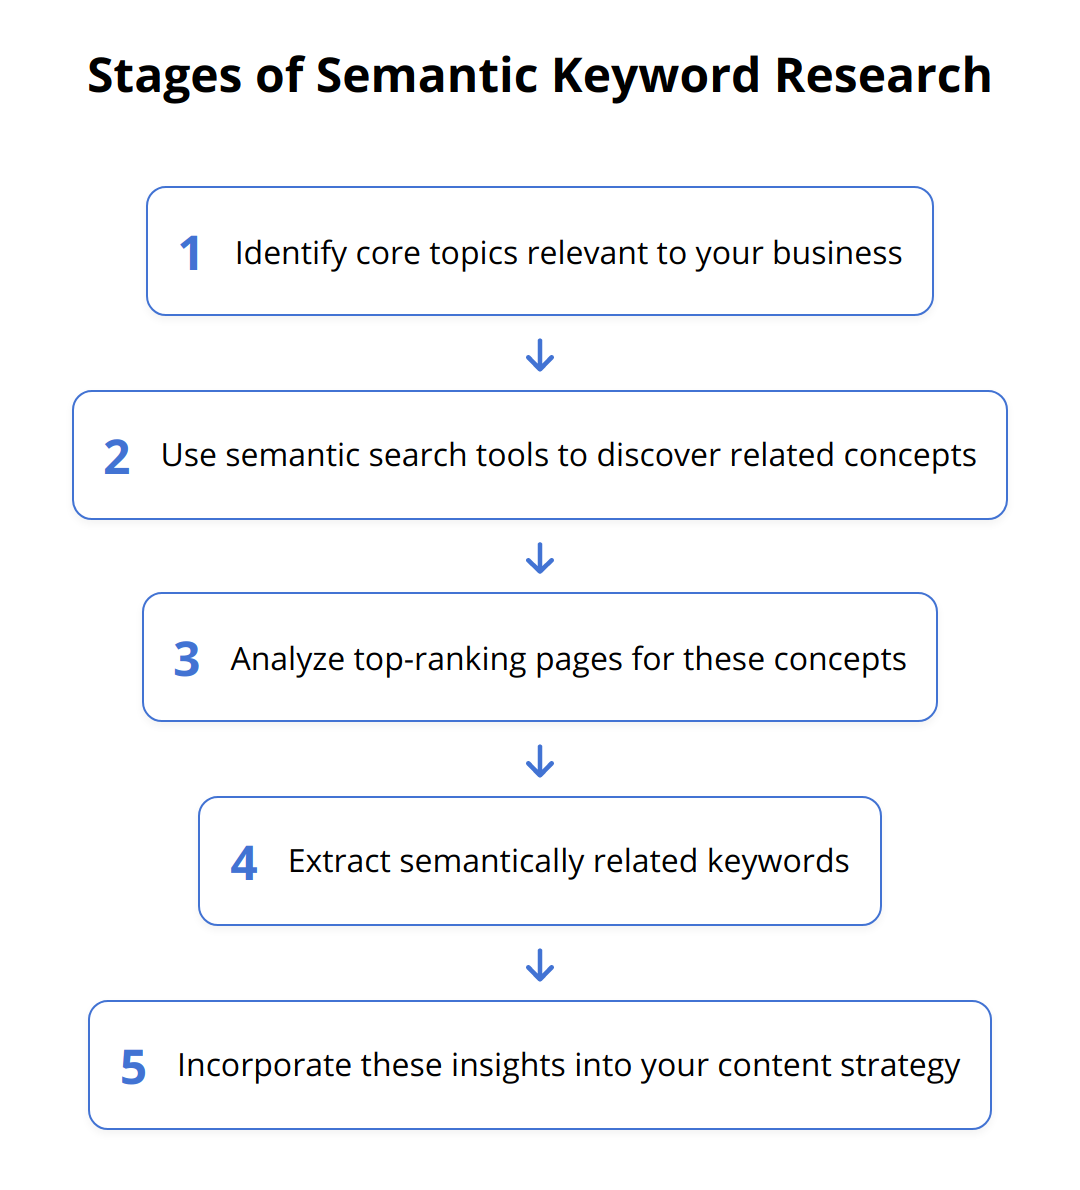 Flow Chart - Stages of Semantic Keyword Research